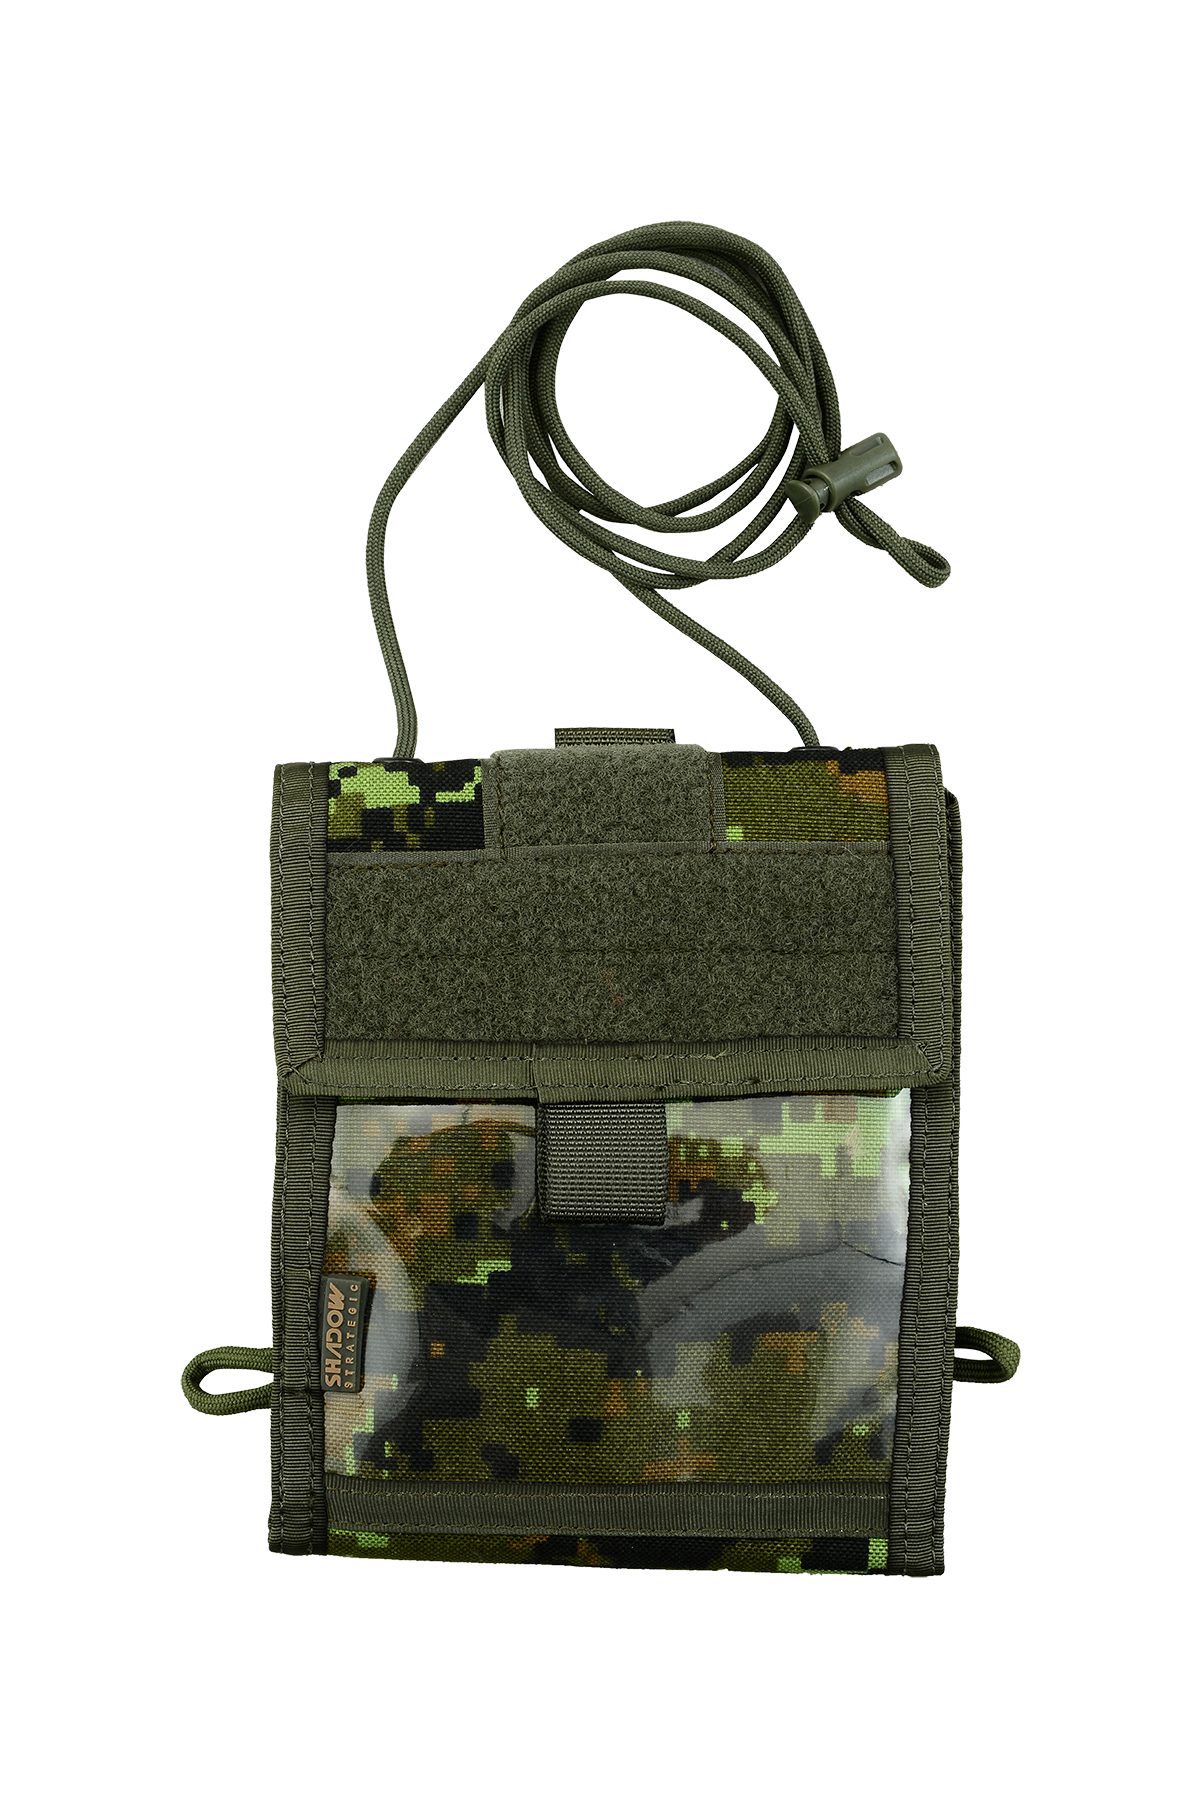 SHE-952 Traveller , ID Pouch